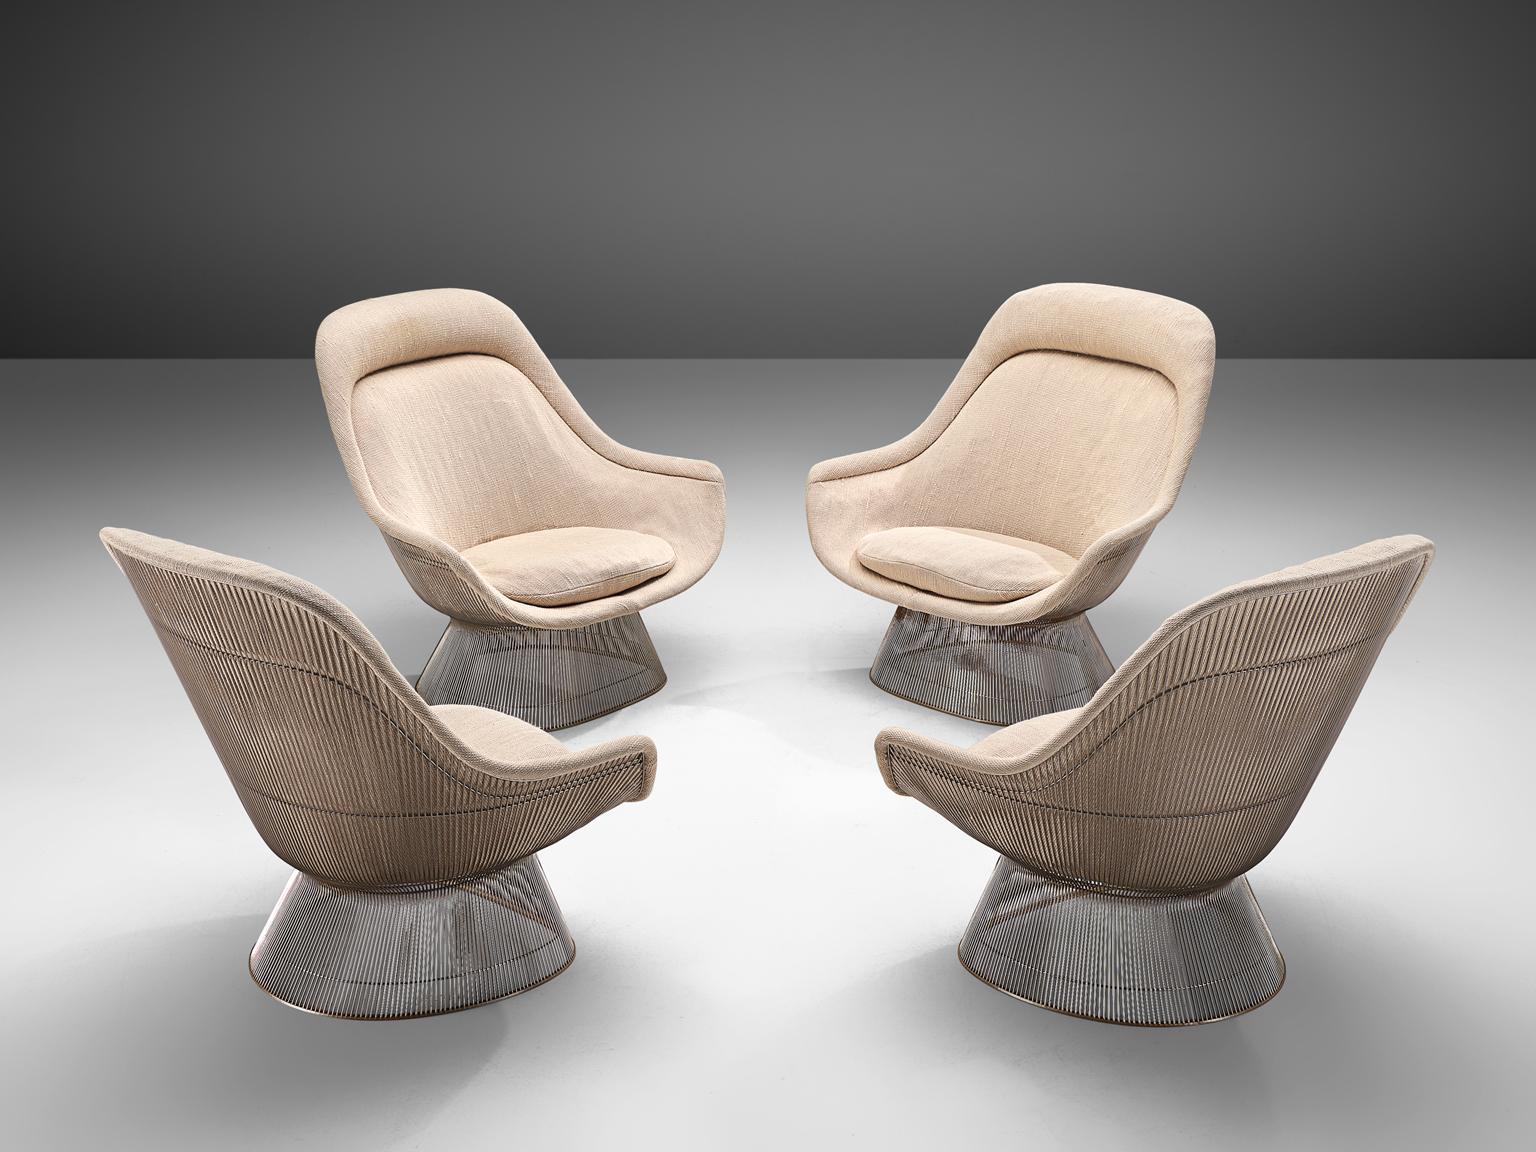 Warren Platner, four lounge chairs 'model 1705', steel and original beige fabric, United States, design 1966, production later.

These iconic beige easy chairs by Warren Platner is created by welding curved steel rods to circular and semi-circular